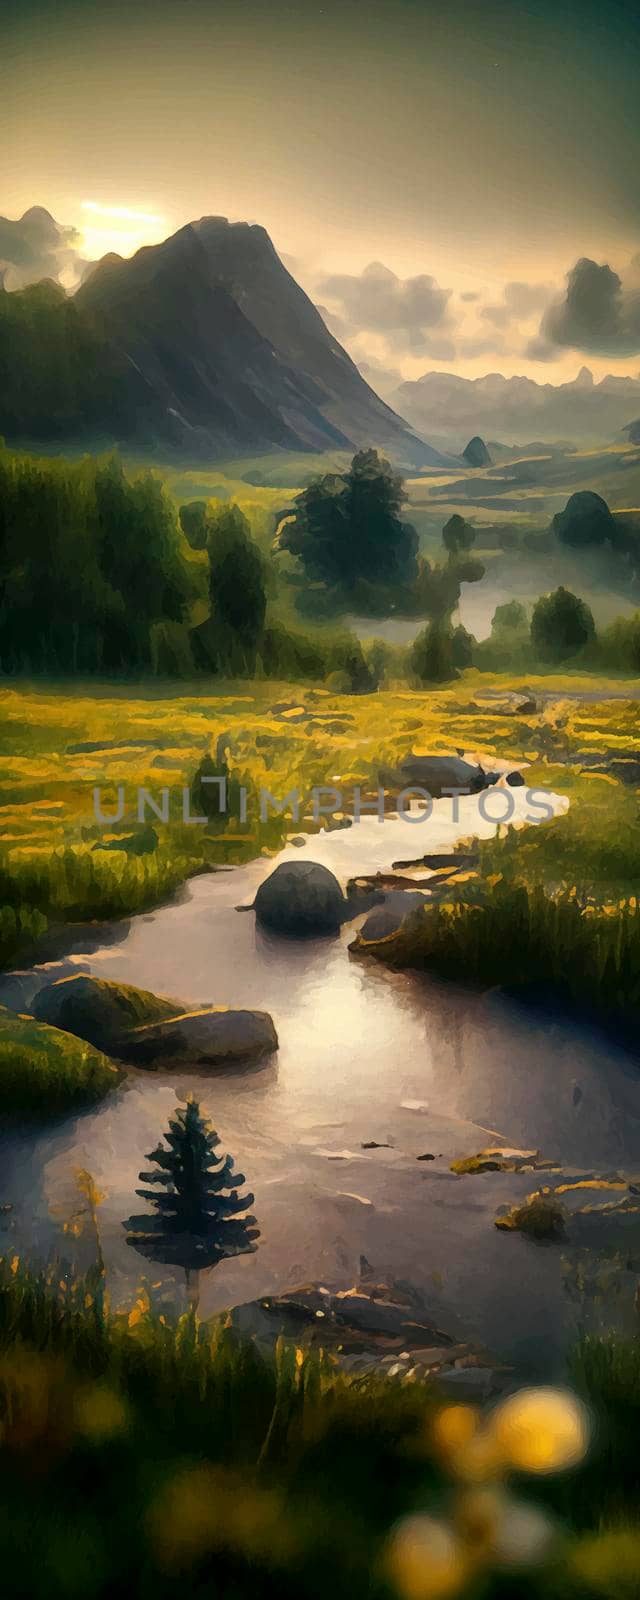 panoramic Illustration of peaceful landscape with a natural setting, cinematic and beautiful landscape illustration. by JpRamos